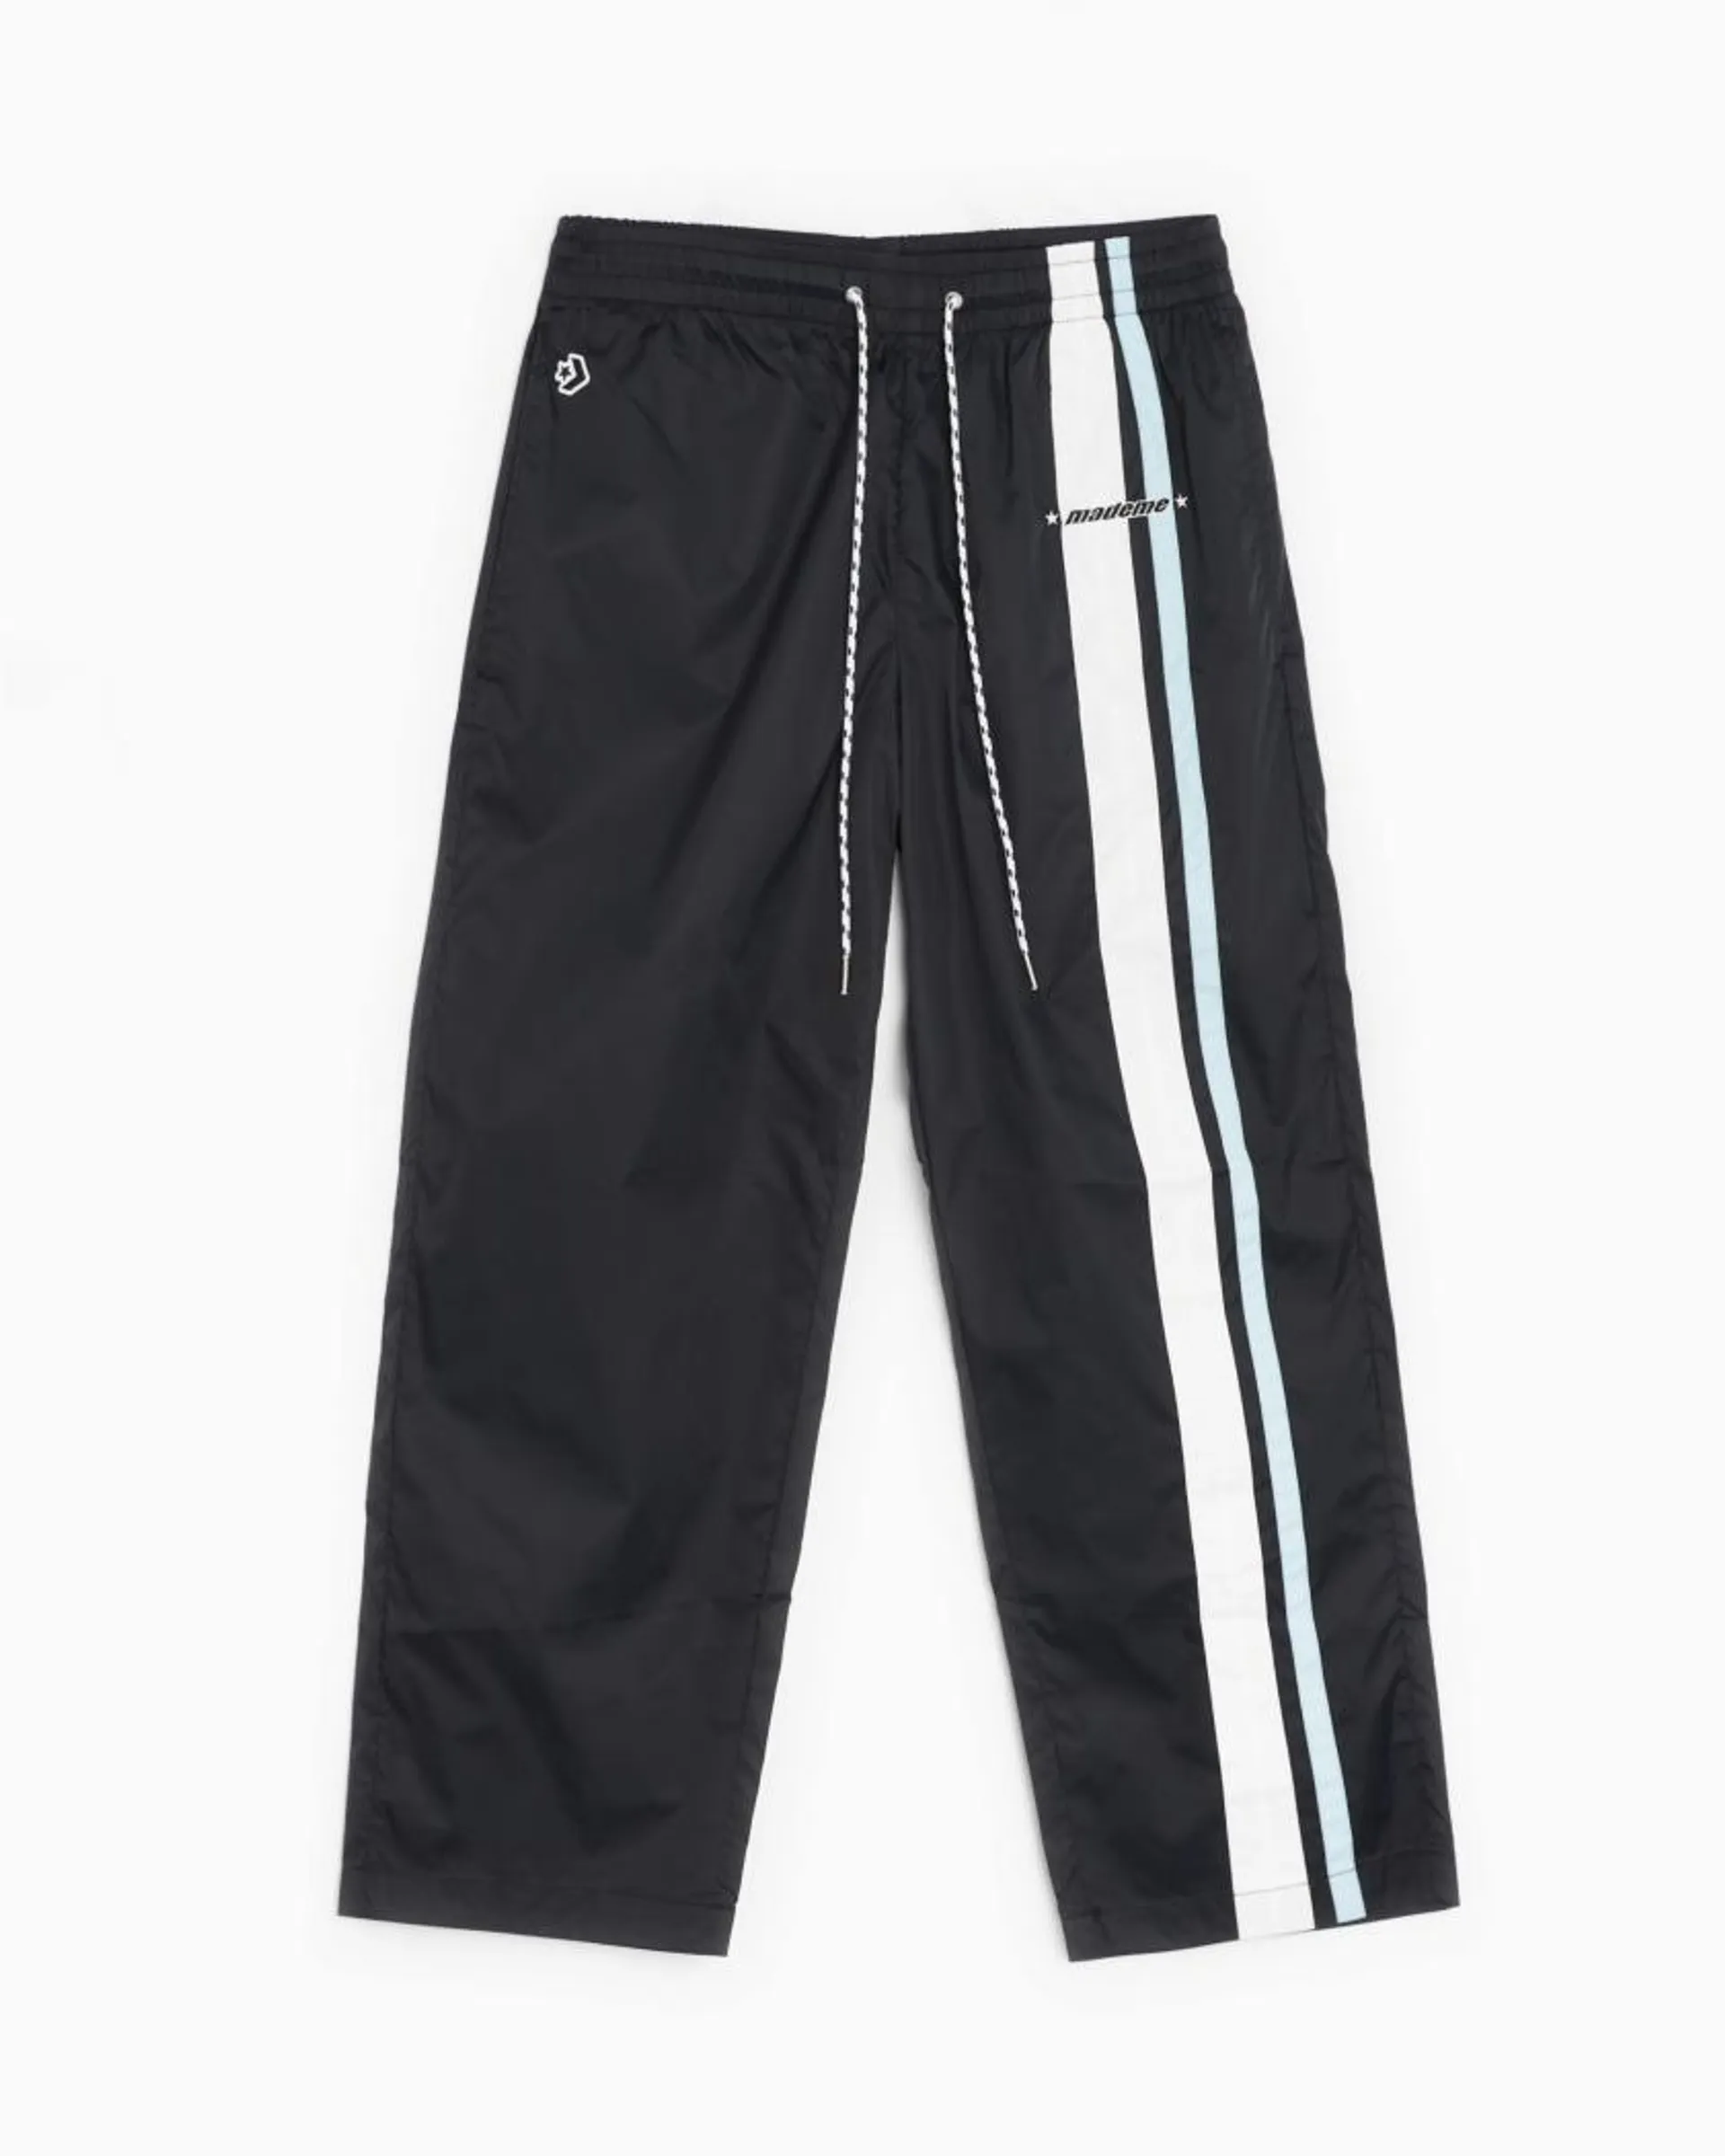 Converse x Made Me Unisex Track Pant